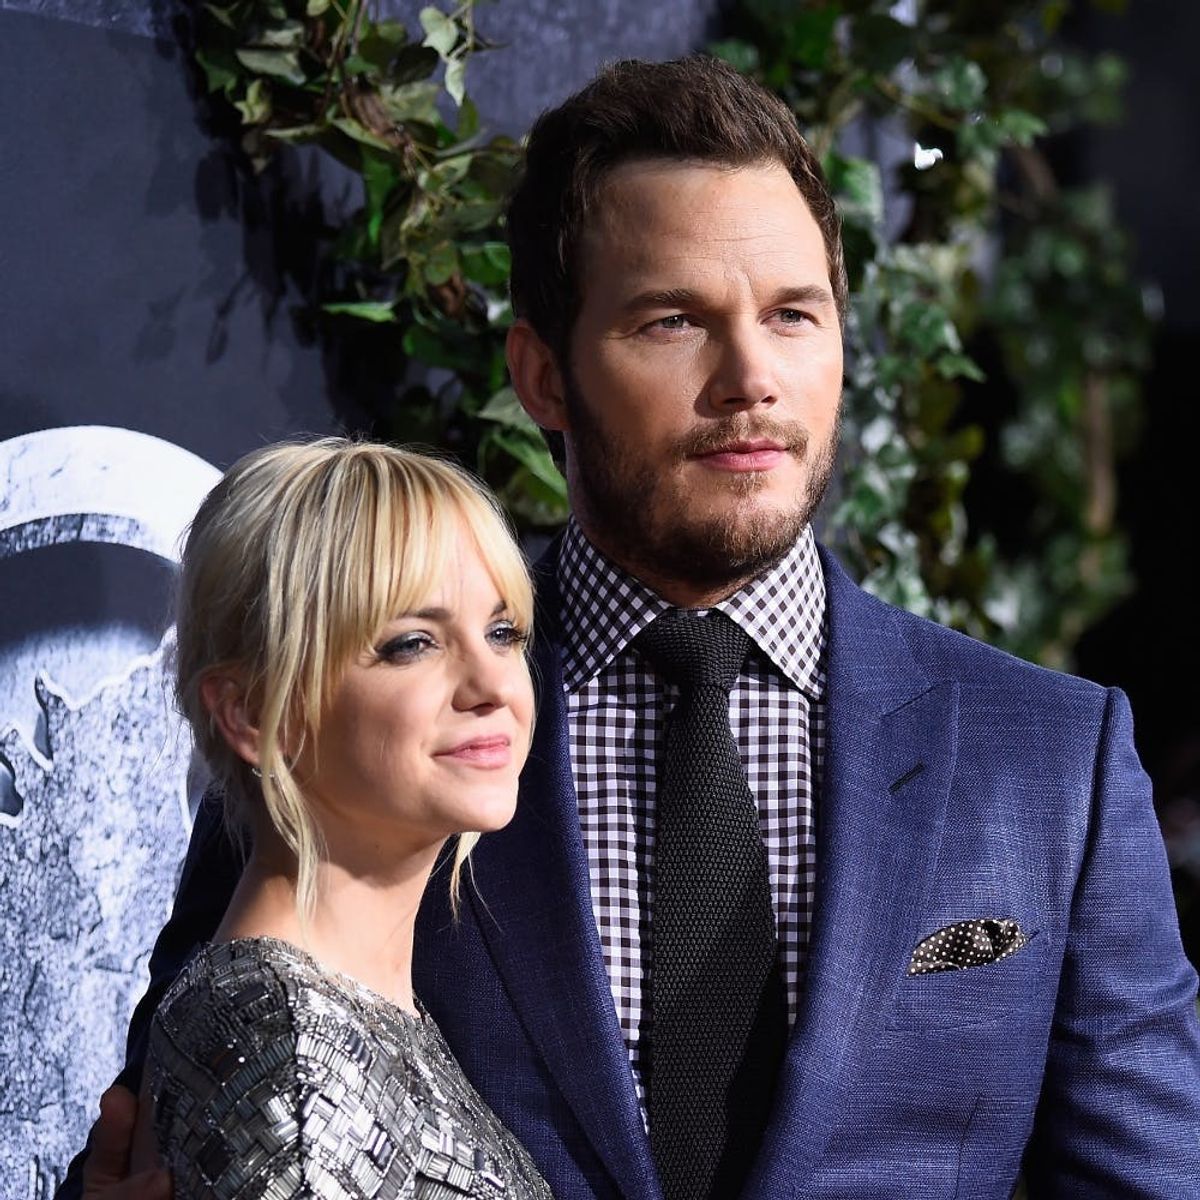 Chris Pratt’s Sweet Vids of Anna Faris and Little Jack Watching the Olympics Are Beyond Cute